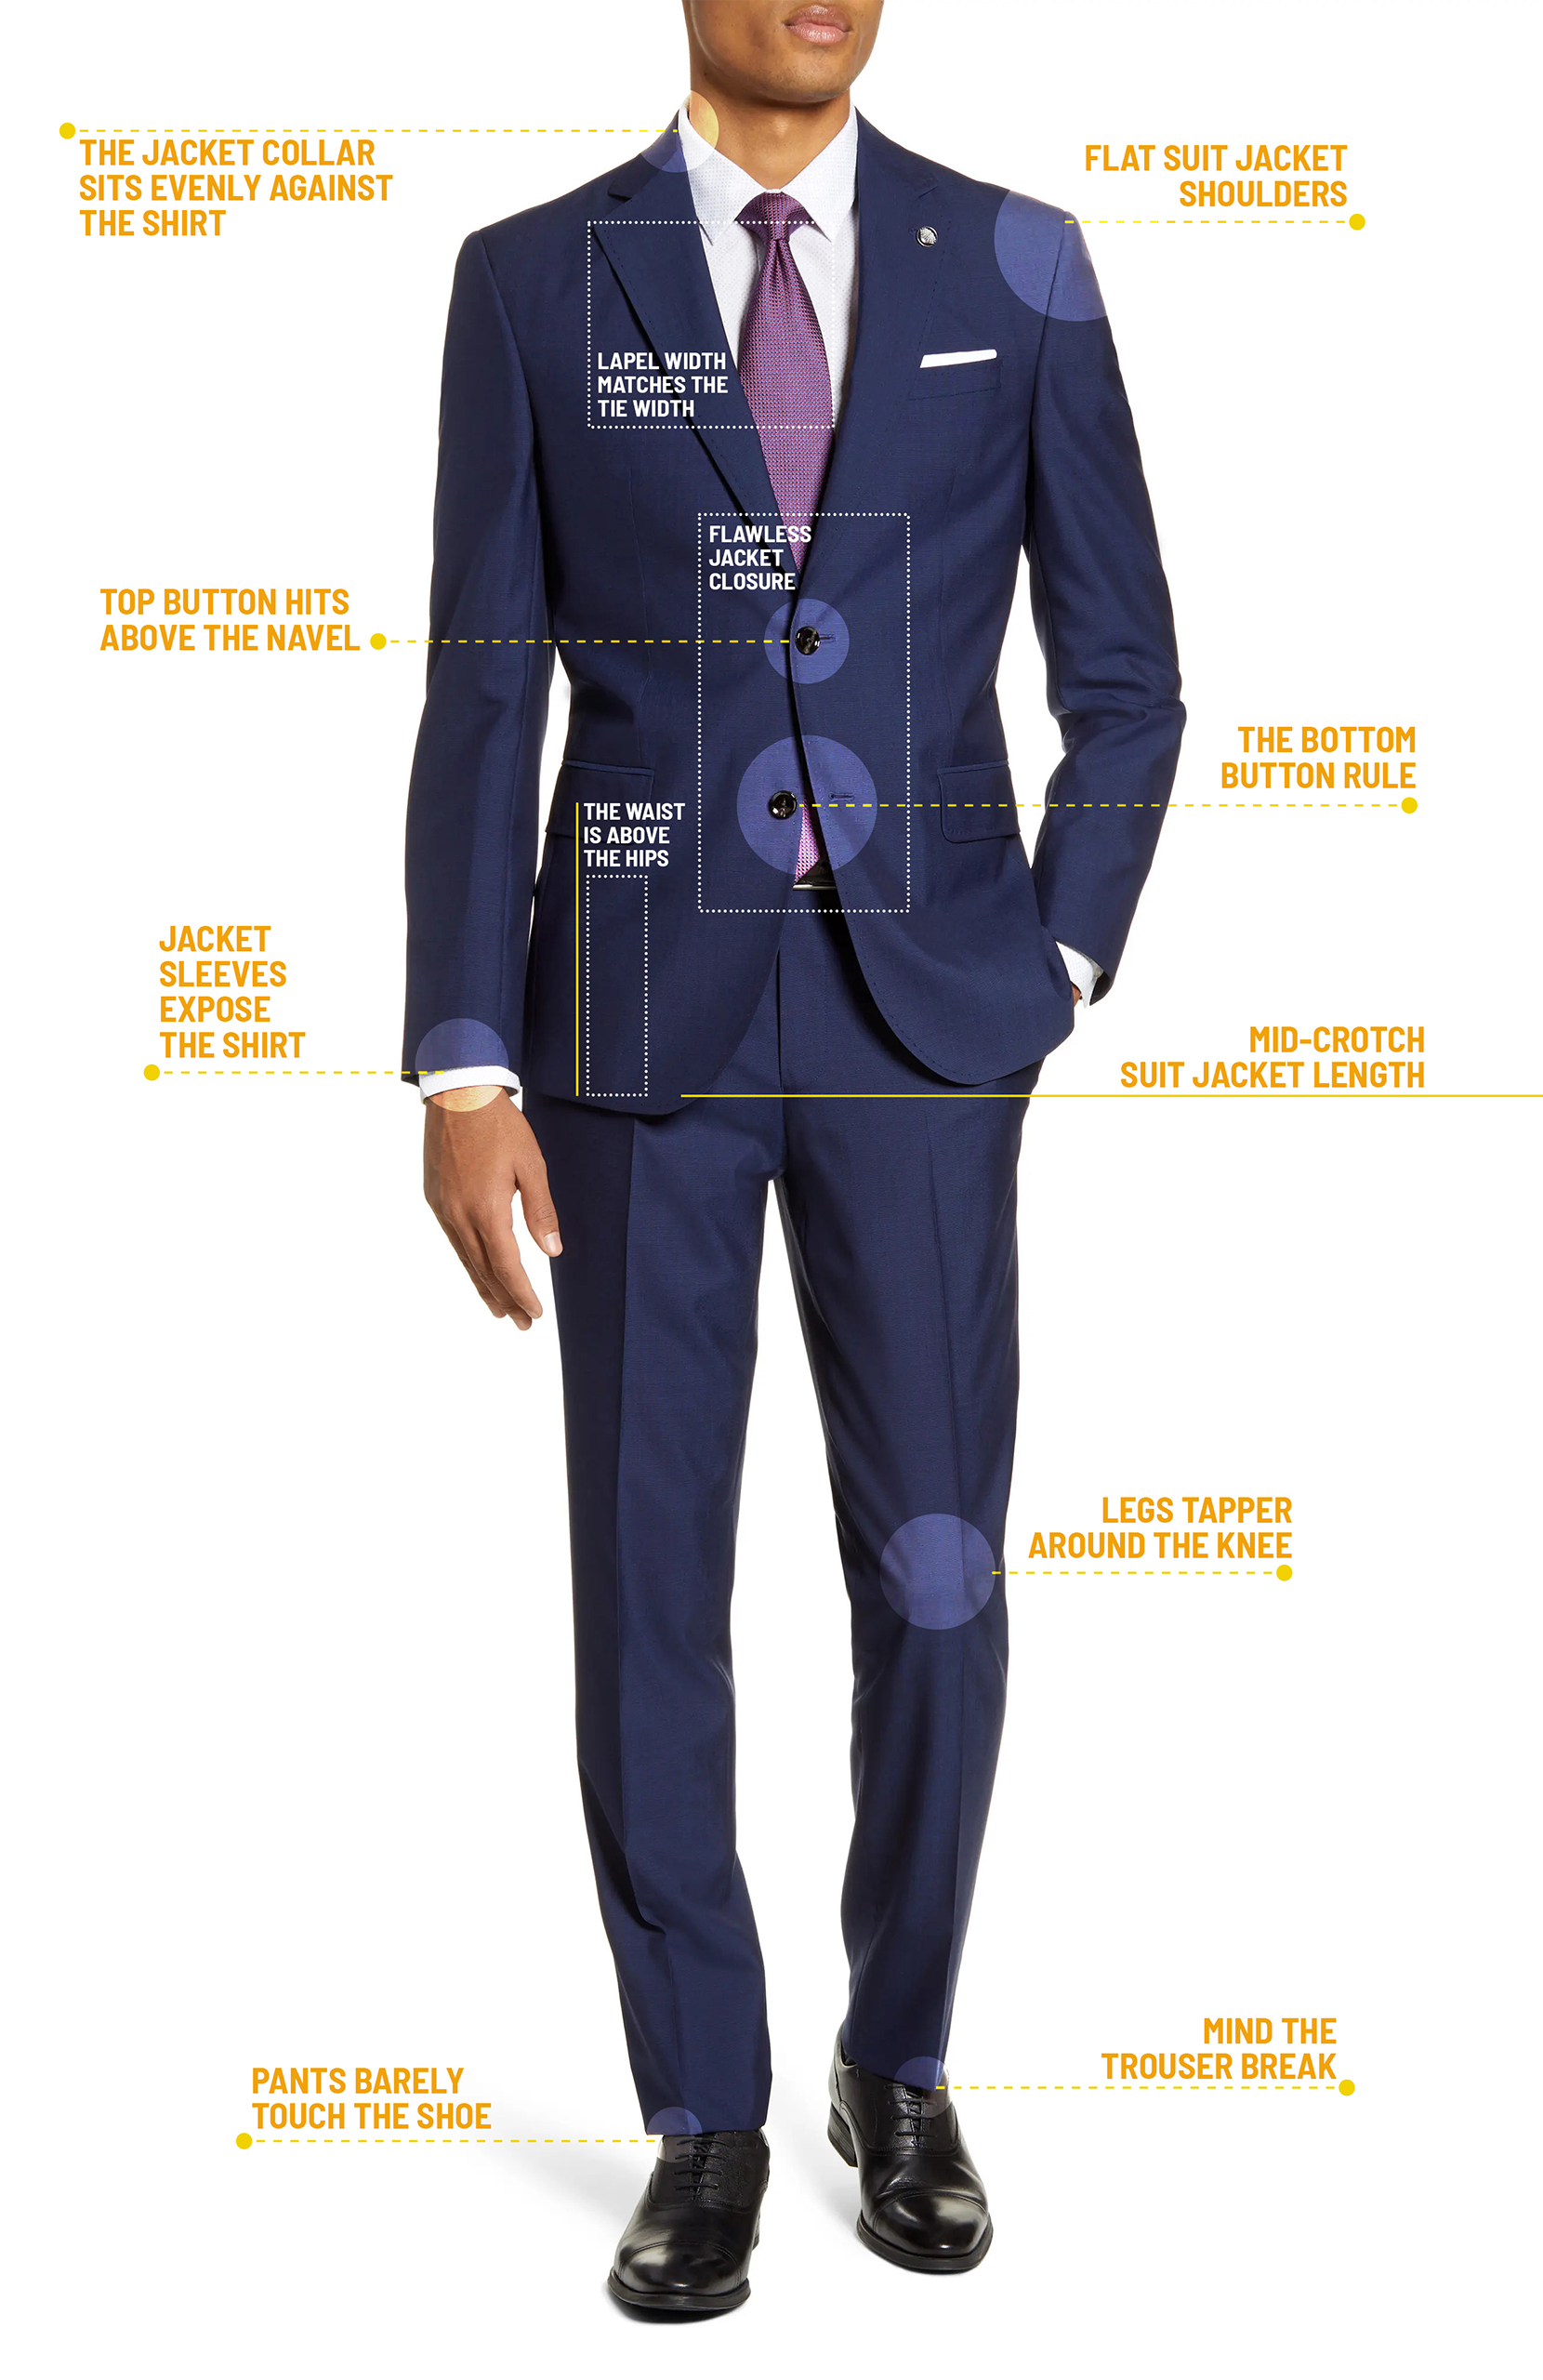 Basic rules on how should a suit fit